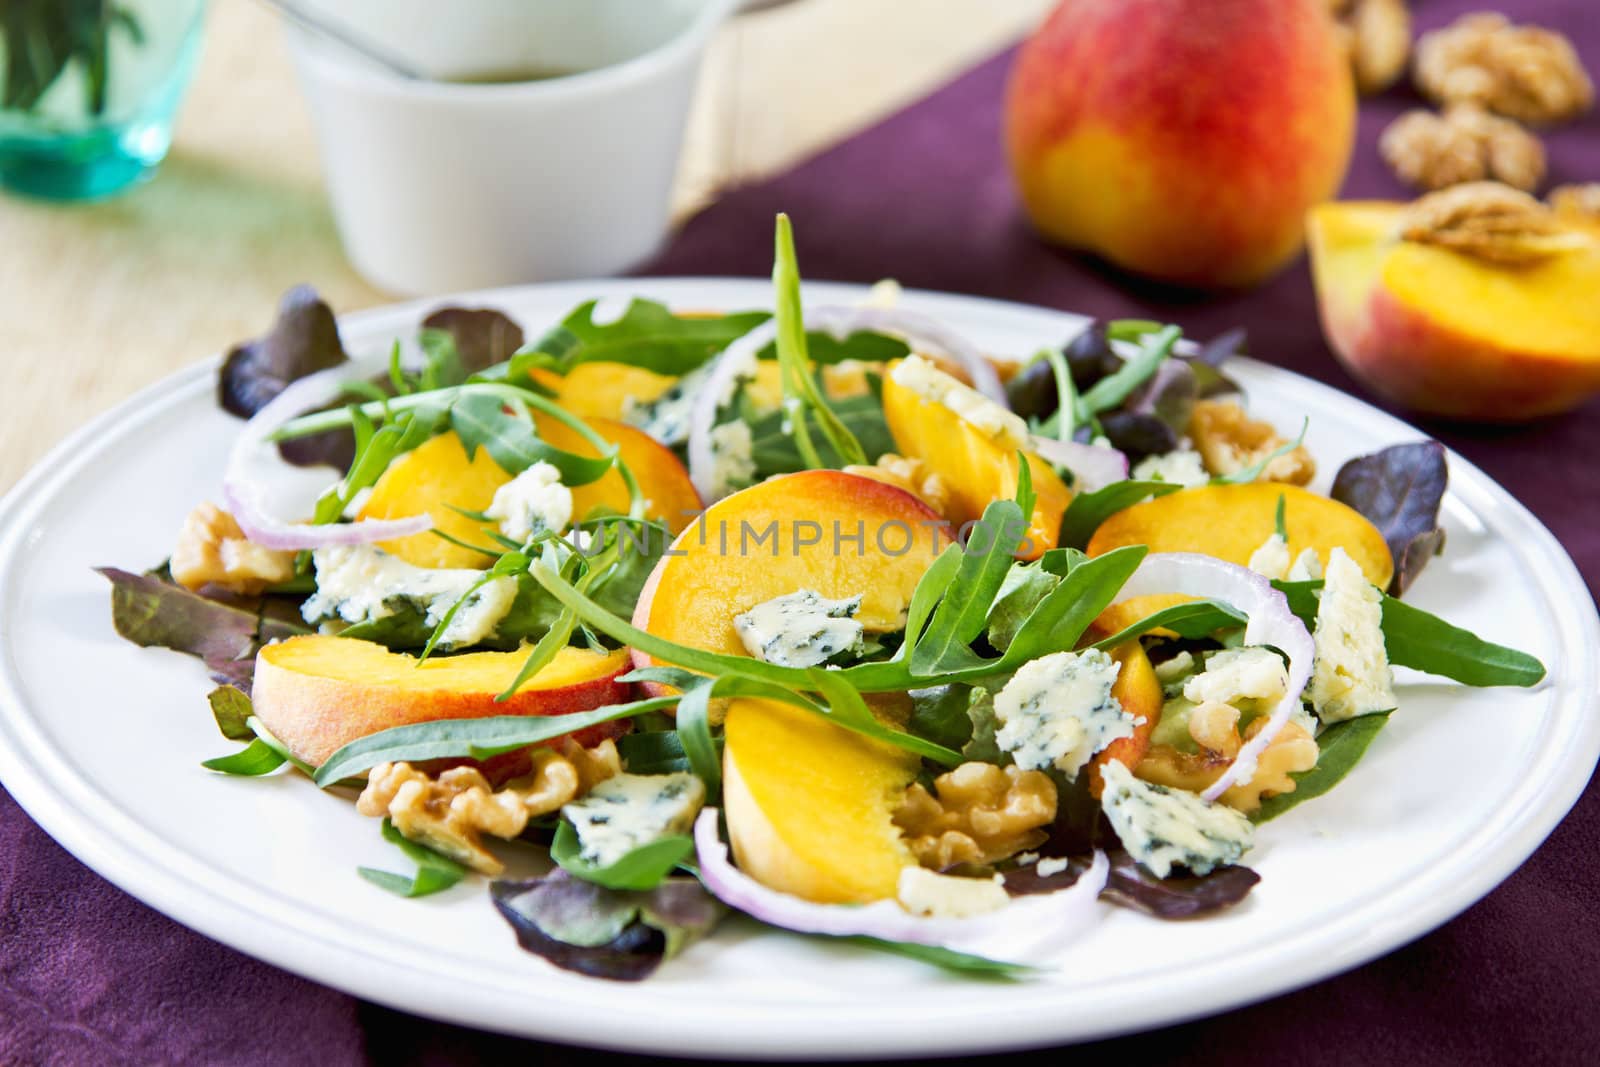 Peach with Blue cheese and Rocket salad by vanillaechoes